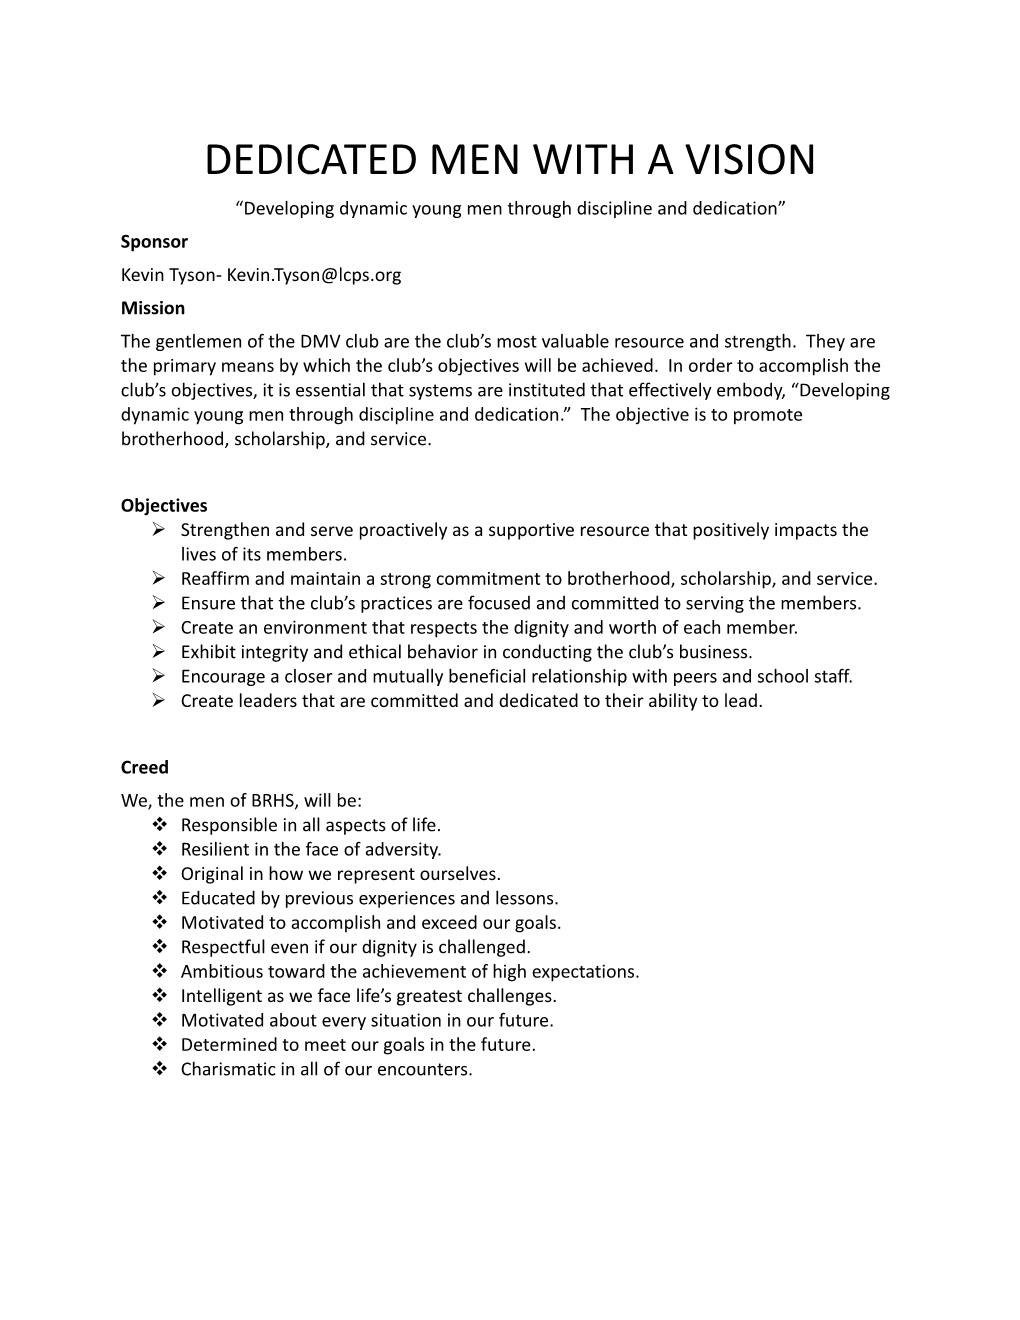 Dedicated Men with a Vision